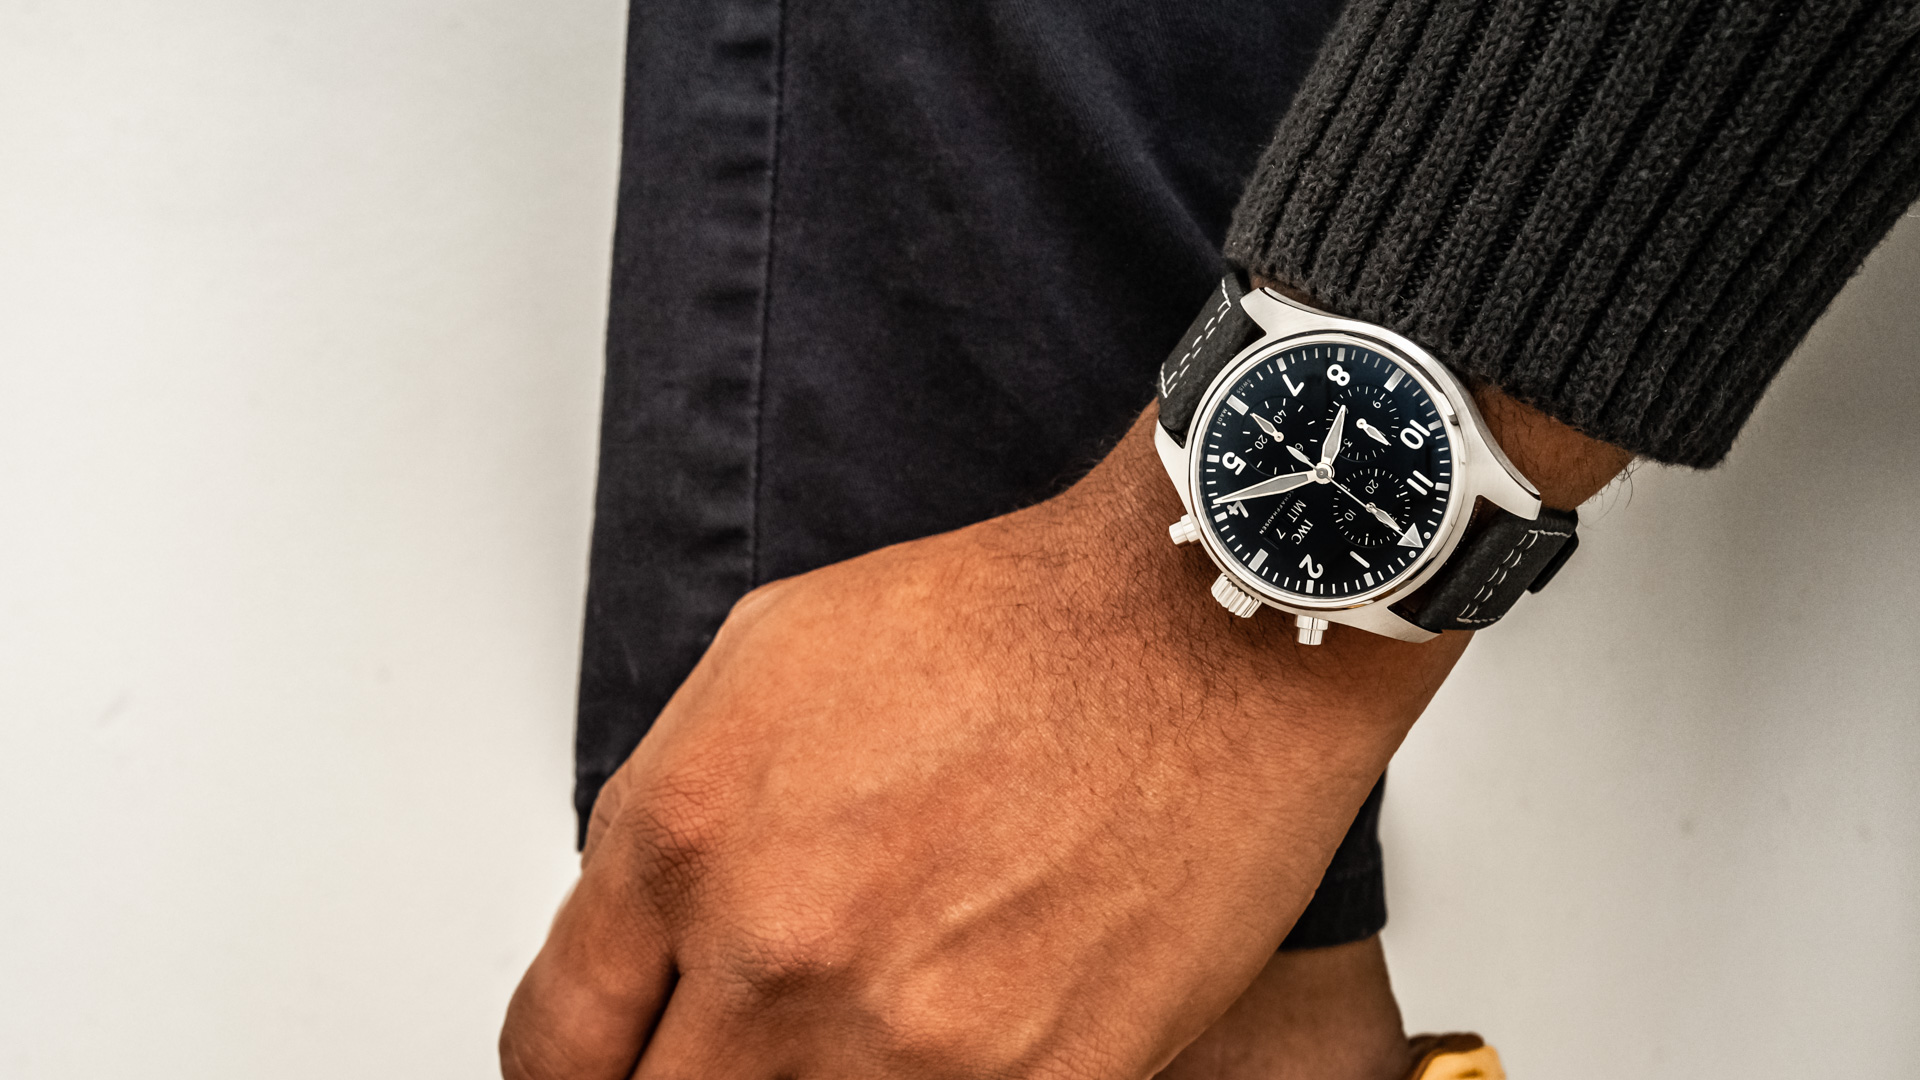 Hands-On: Replique IWC Pilot’s Watch Chronograph Edition C.03 For Collective Horology